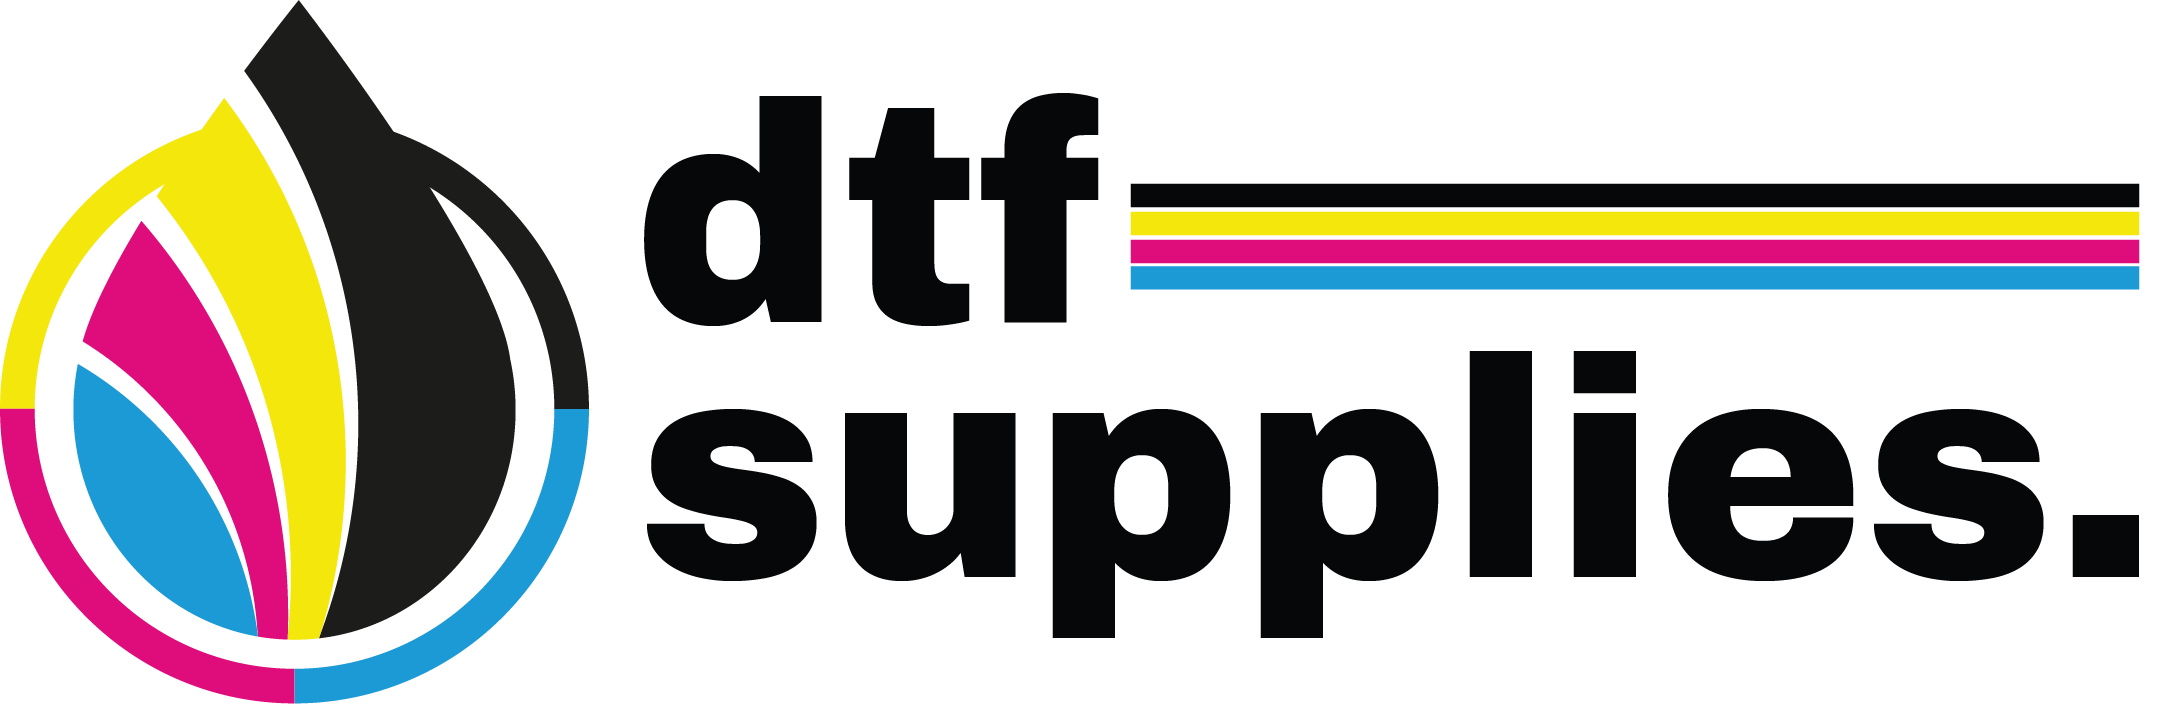 One Stop shop For your DTF Printing - DTF Printer & DTF Supplies | Custom T-Shirts | DTF Heat Transfer Printing Services